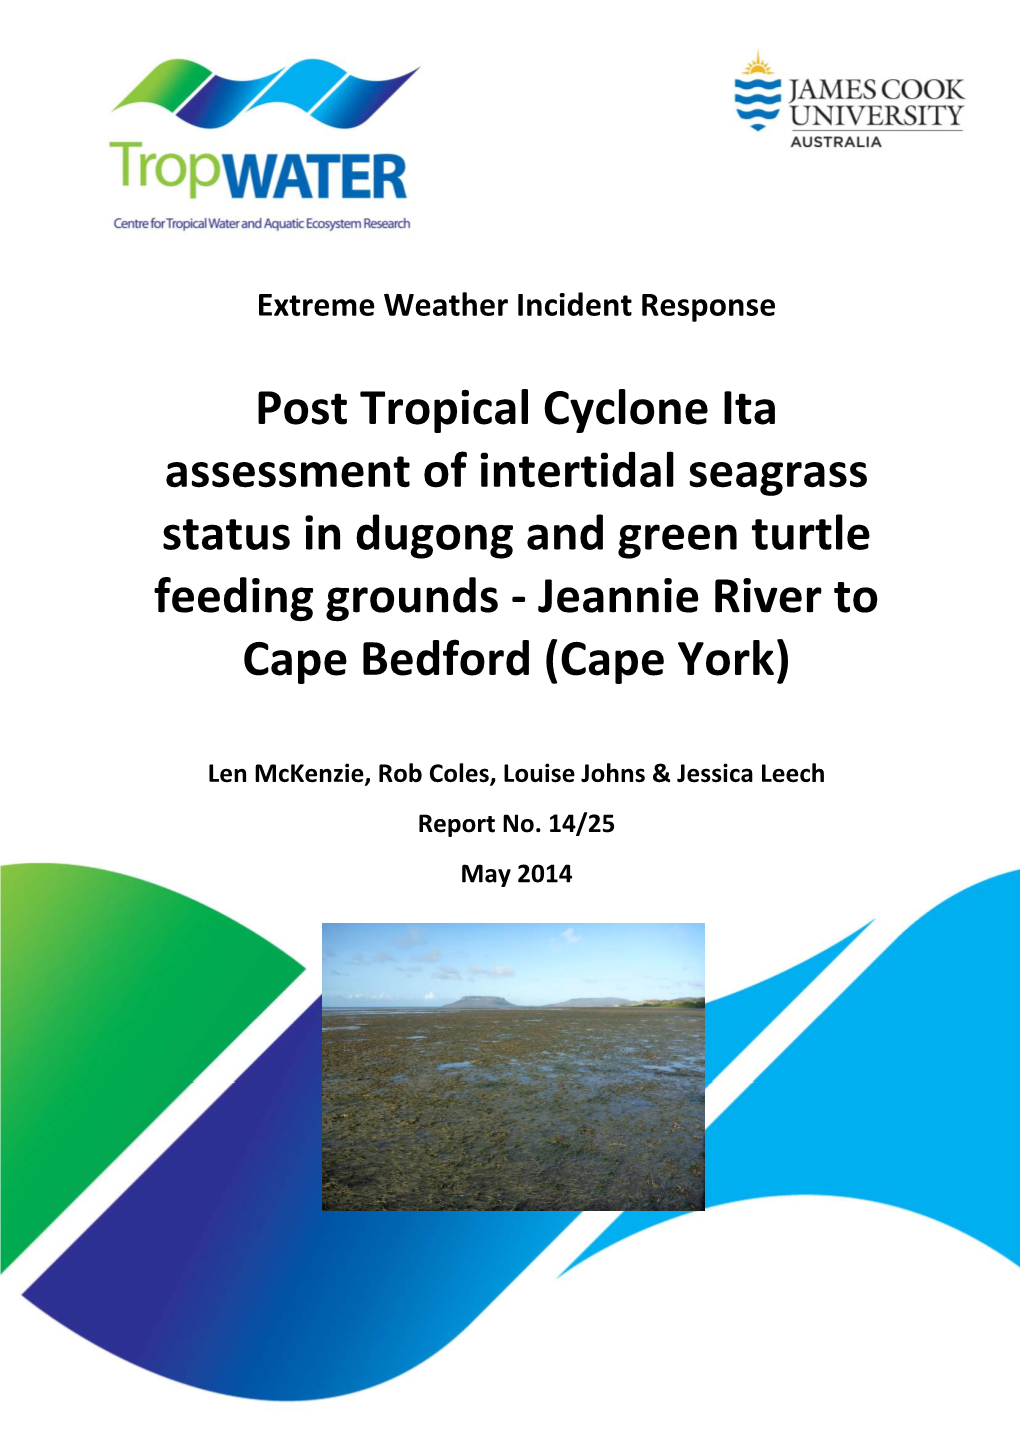 Post Tropical Cyclone Ita Assessment of Intertidal Seagrass Status in Dugong and Green Turtle Feeding Grounds ‐ Jeannie River to Cape Bedford (Cape York)